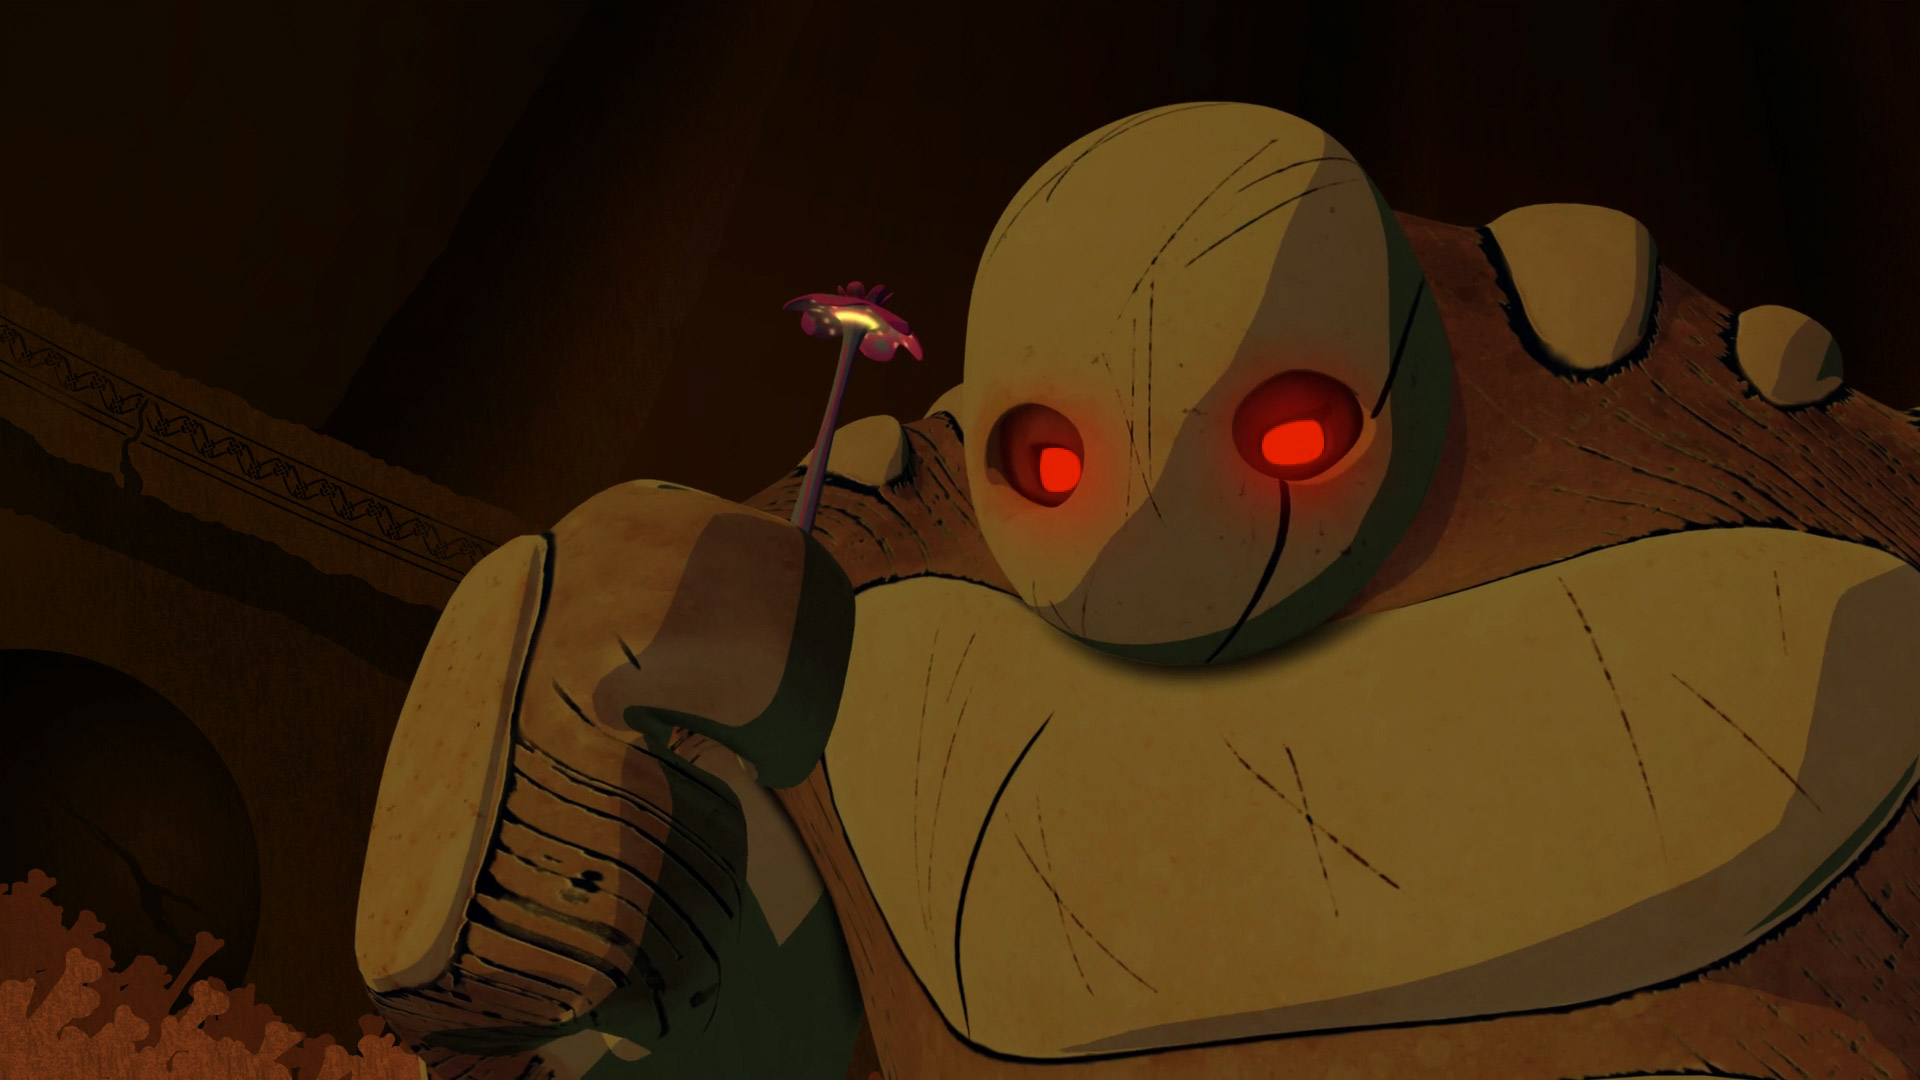 awesome-sci-fi-animated-short-the-guardians-tale-08.jpg